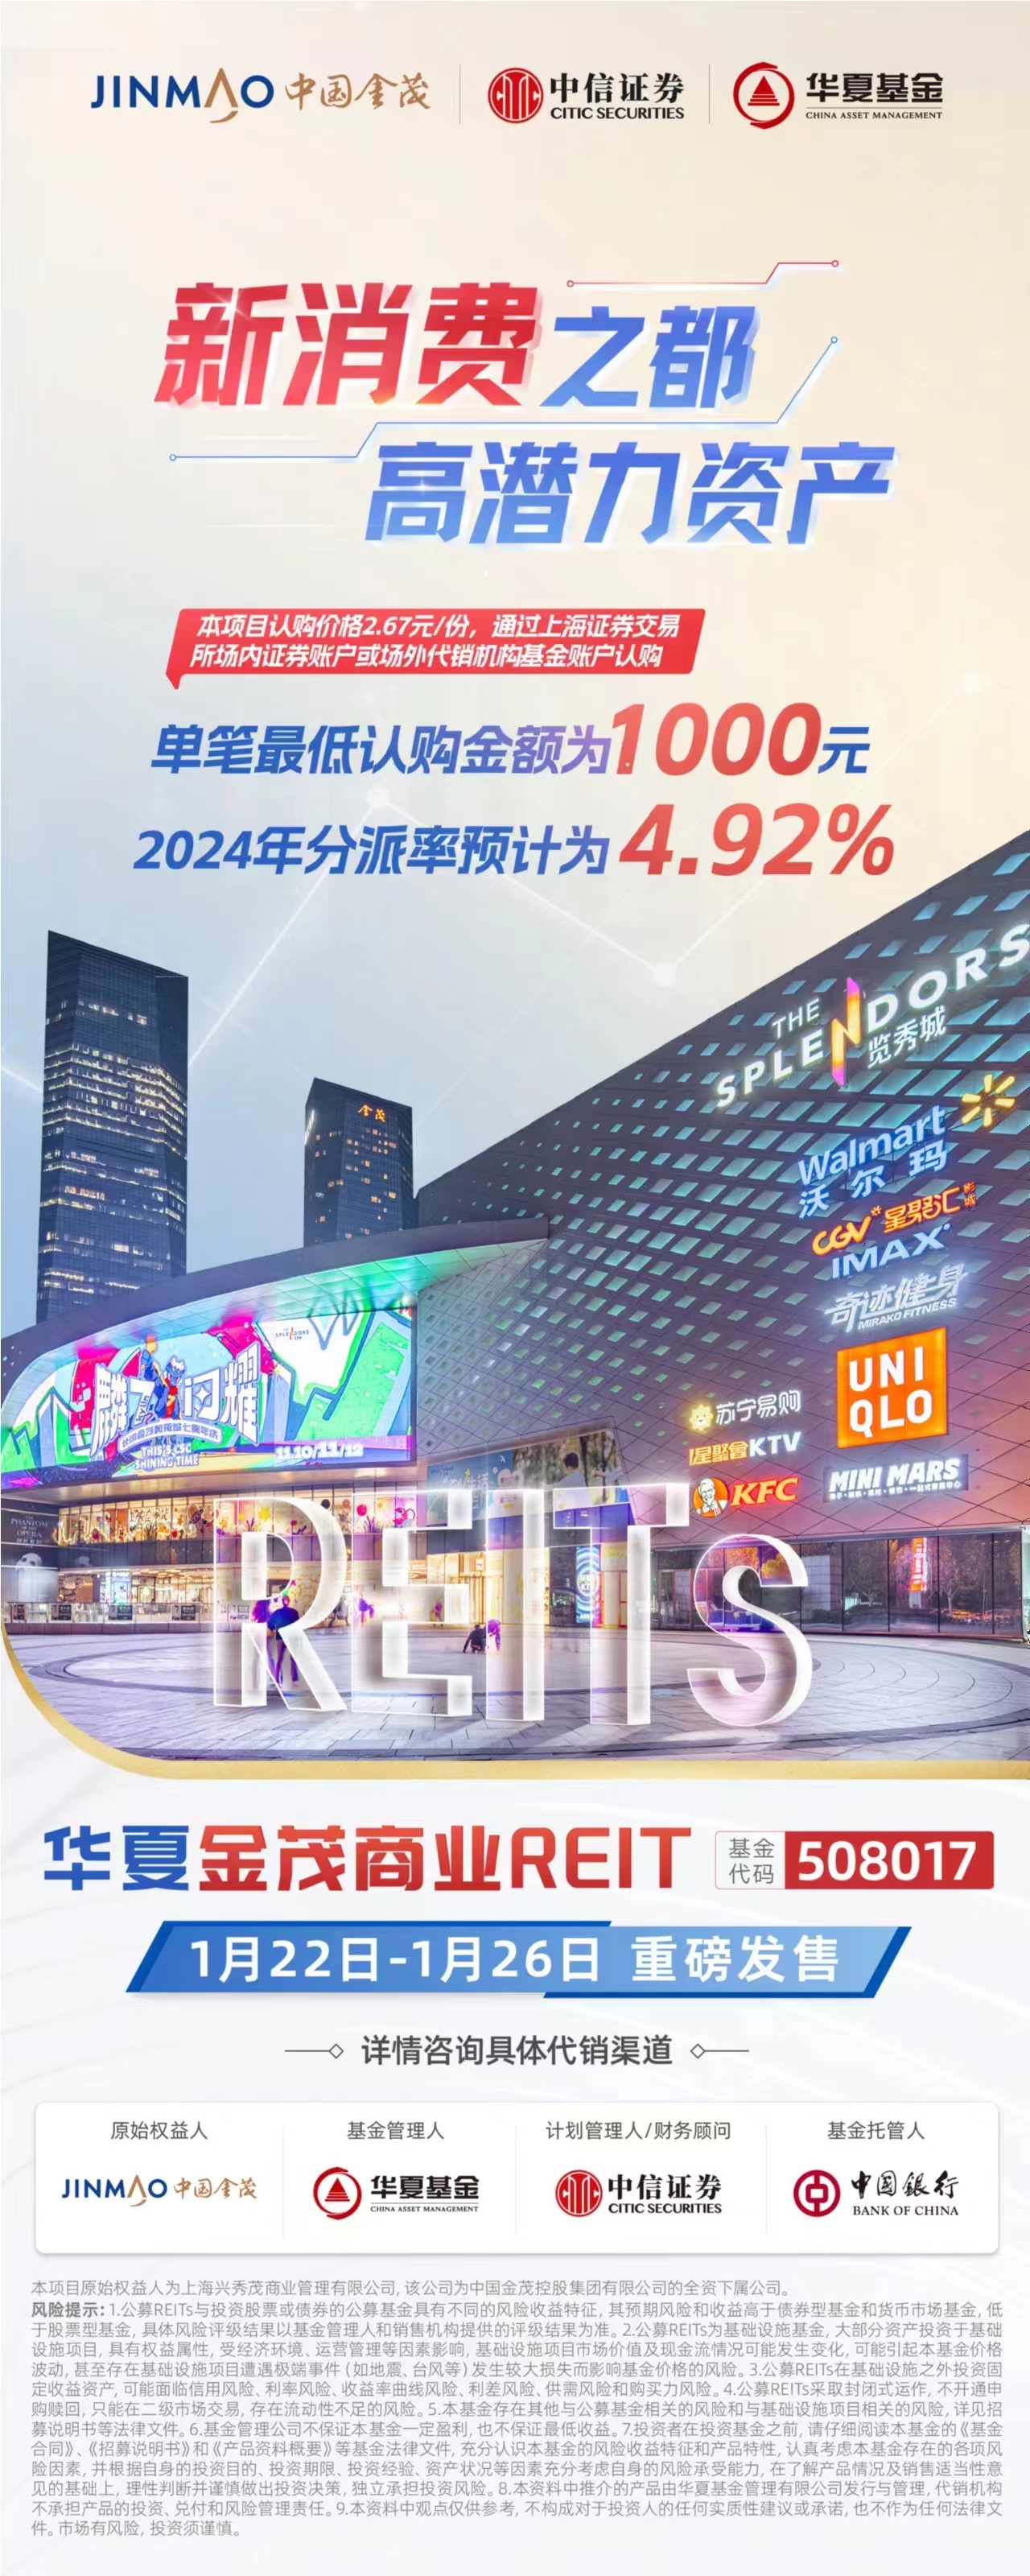 Consumer REITs will be released on sale on January 22 on January 22